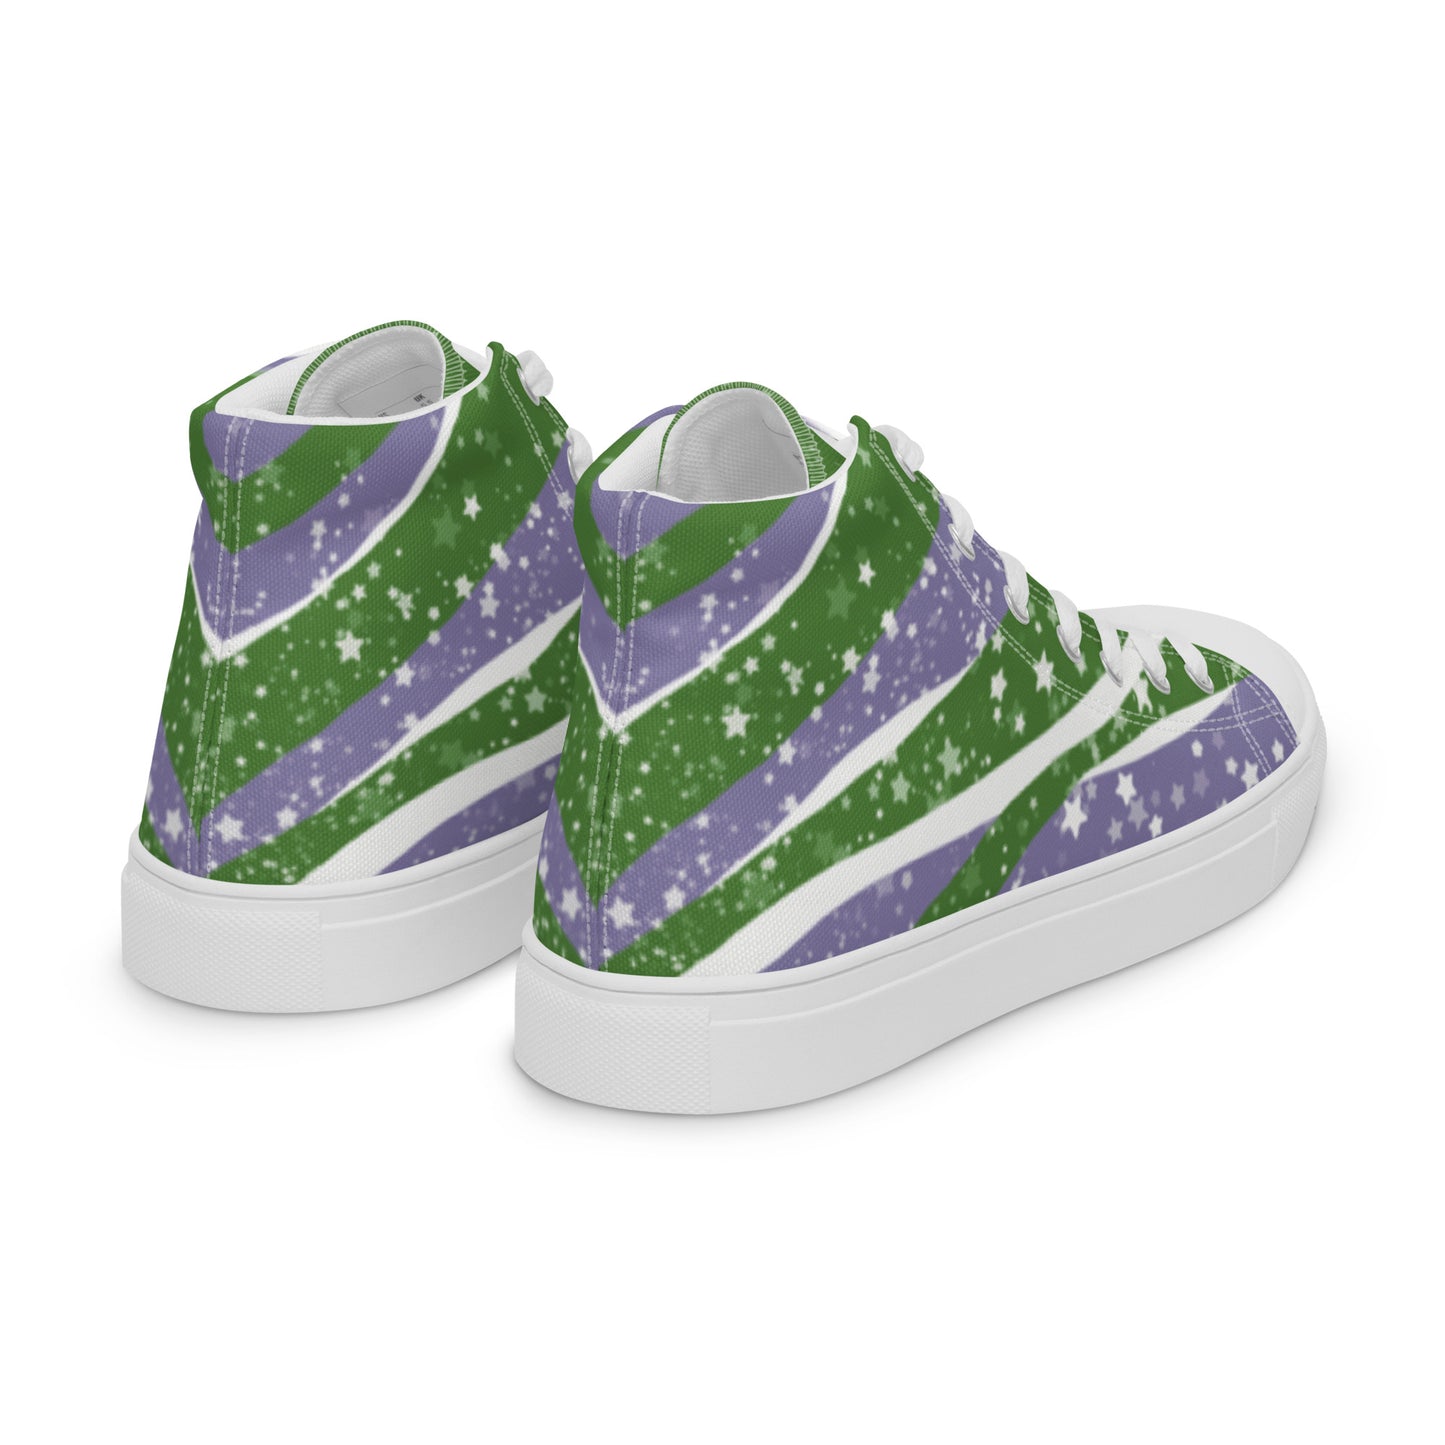 Right back view: a pair of high top shoes with green, purple, and white ribbons that get larger from heel to laces, white stars, and the Aras Sivad logo on the tongue.